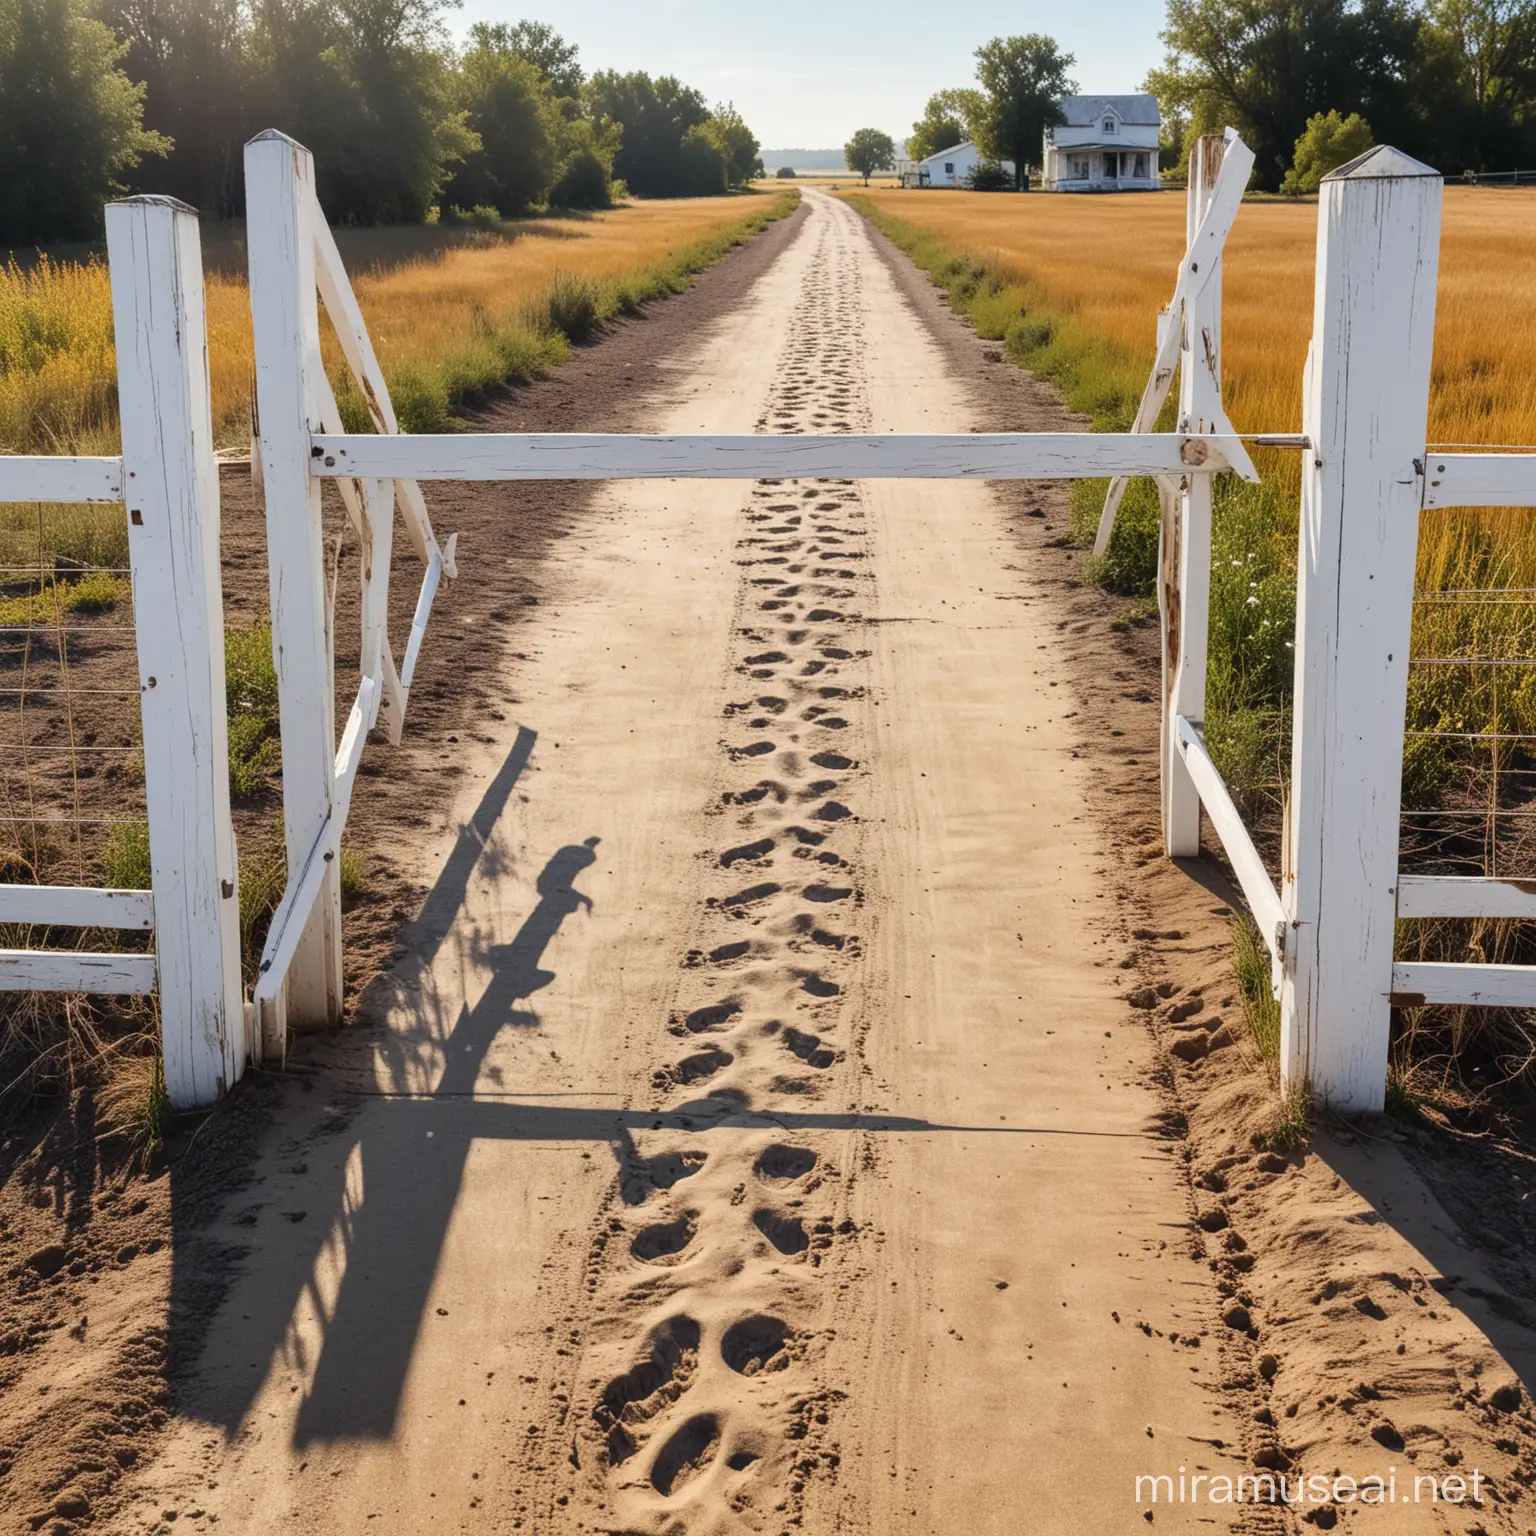 Enchanting Painting of Horse and Boot Tracks by White Wooden Farm Gate